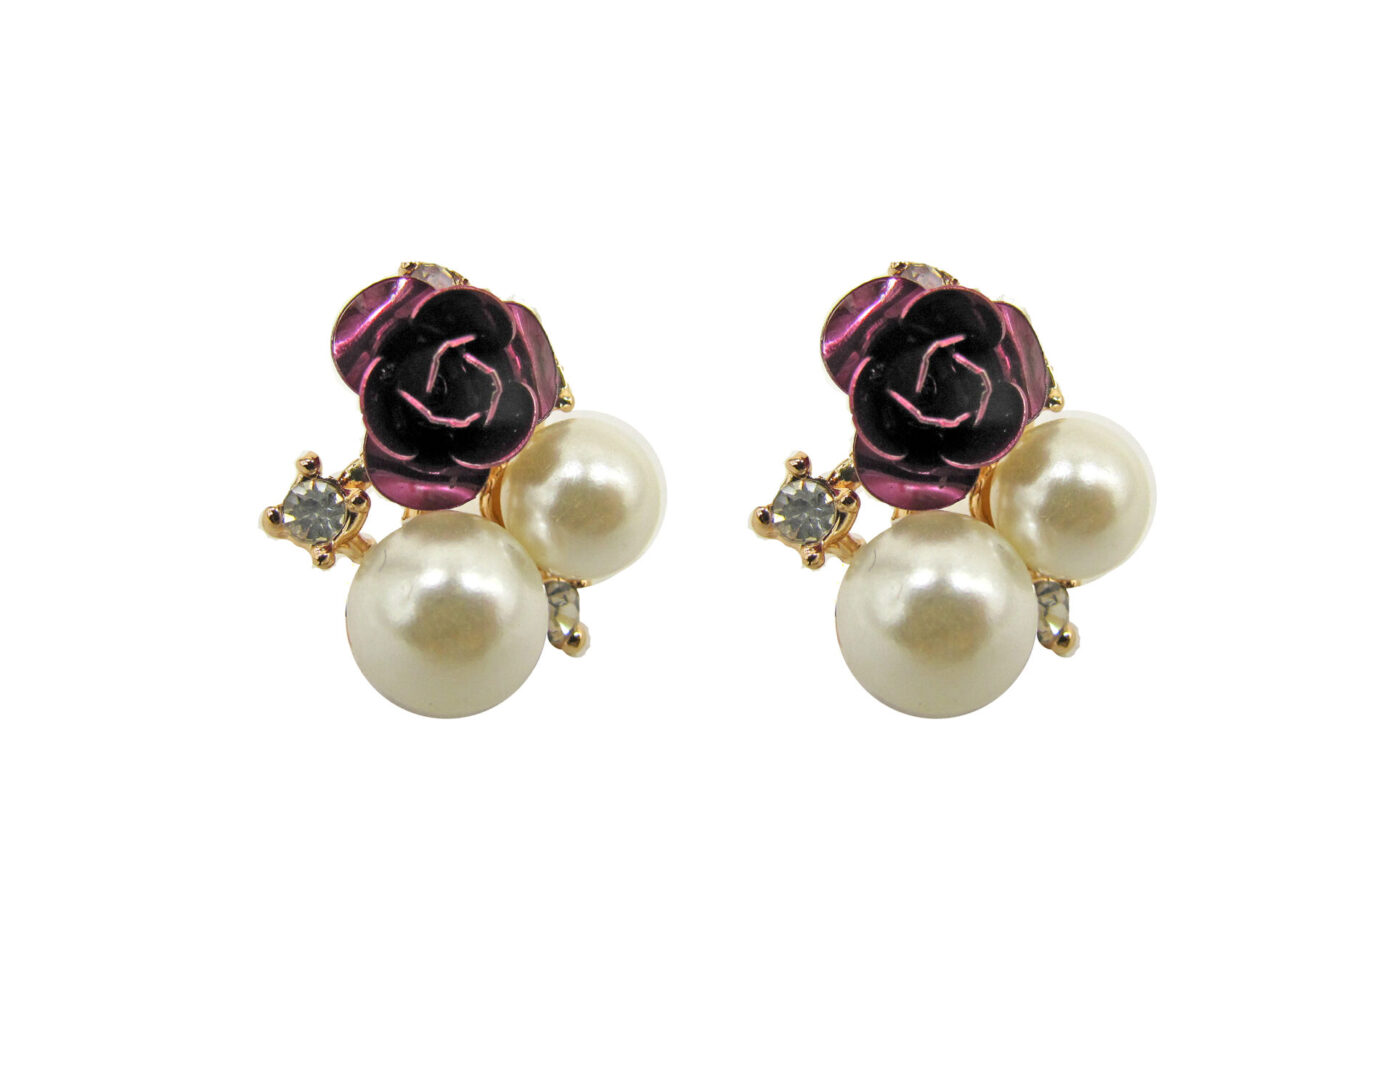 earrings with two pearls and a violet rose